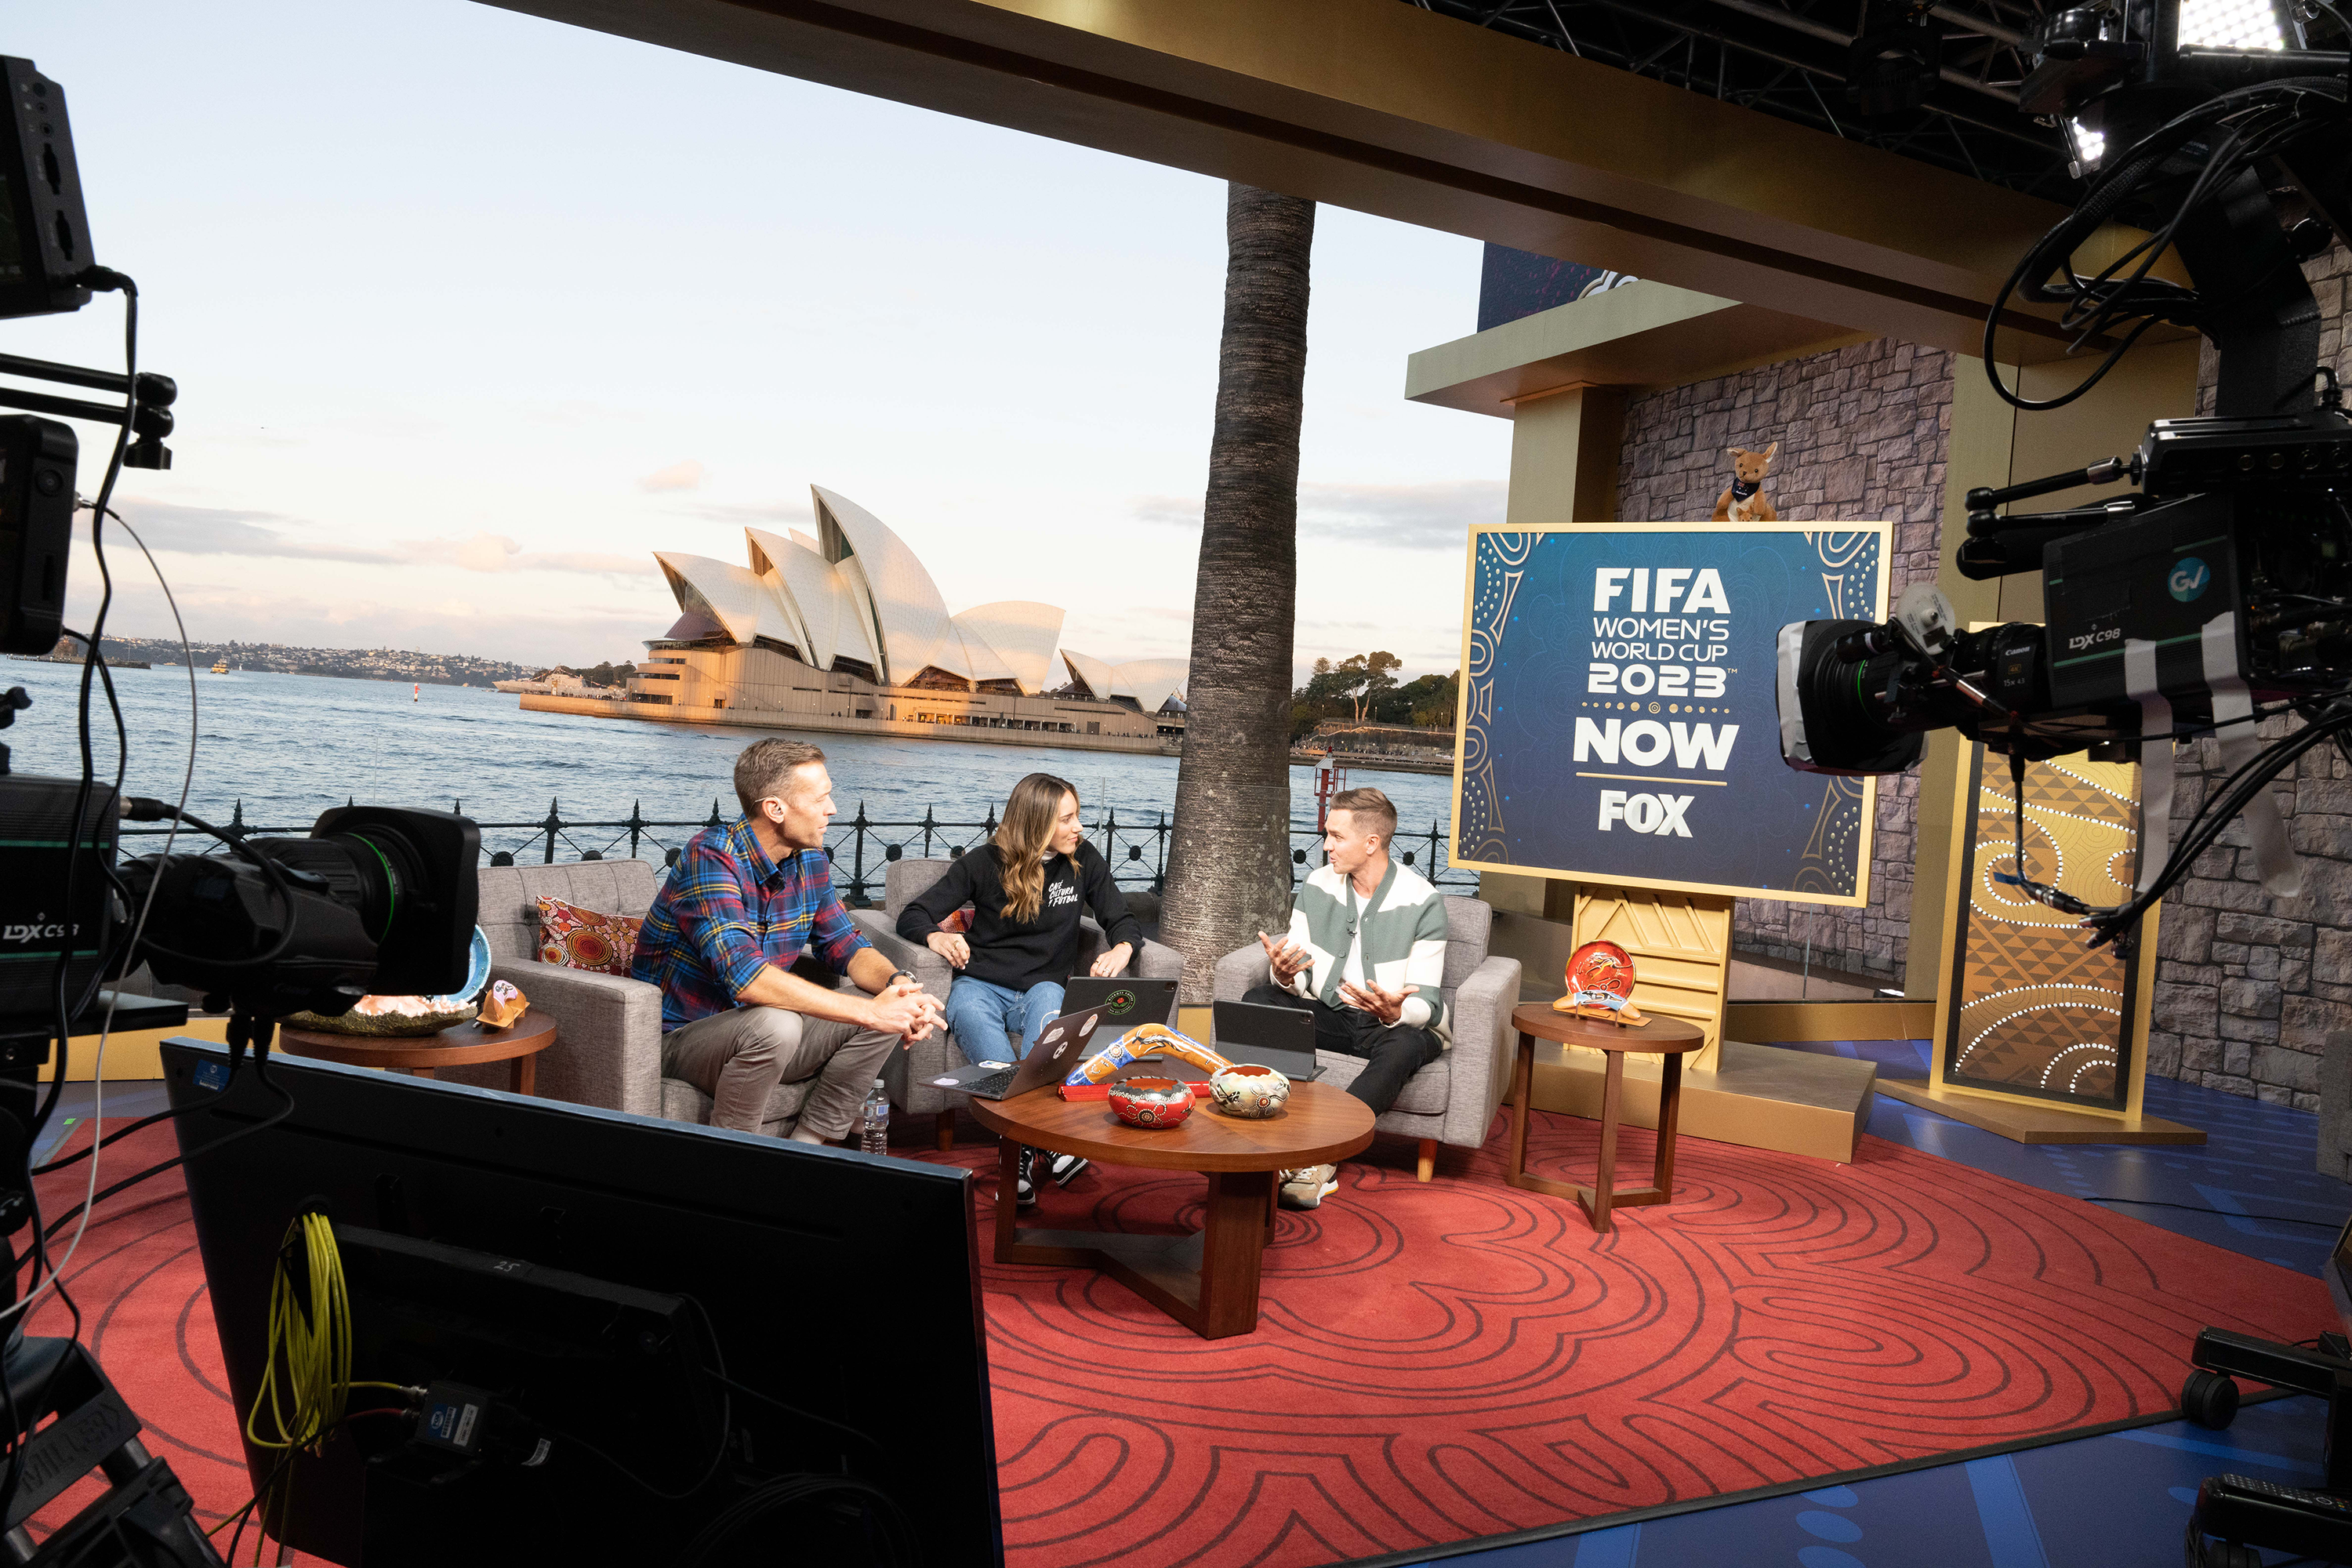 Live From FIFA Womens World Cup Fox Sports Live Social and Digital Content Plan Grows, Even Despite Time Difference With U.S